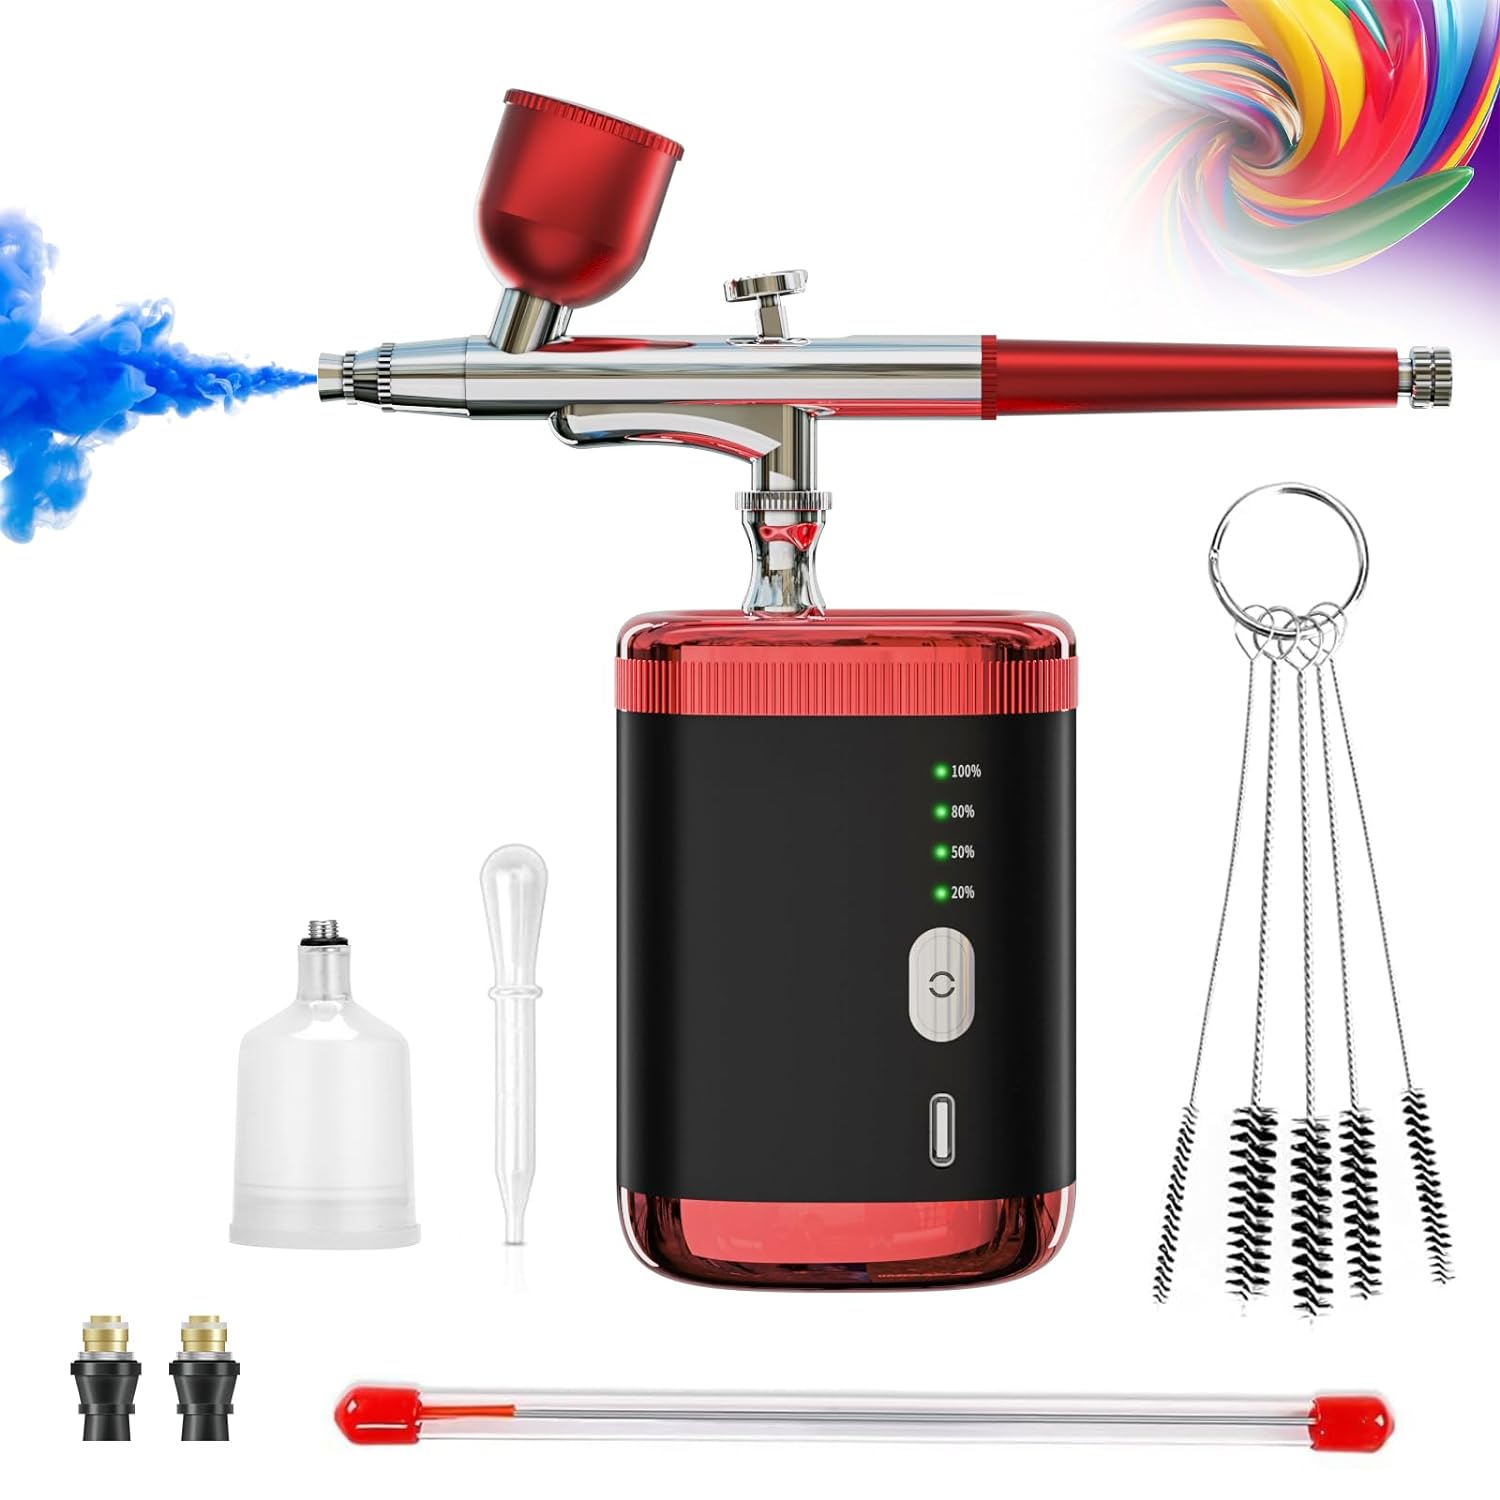 Air Brush Kit with Air compressor, Portable Barber Airbrush Kit 32PSI High Pressure Cordless Airbrush compressor, Rechargeable Auto Handheld Airbrush paint set for Makeup, Nail Art, Painting